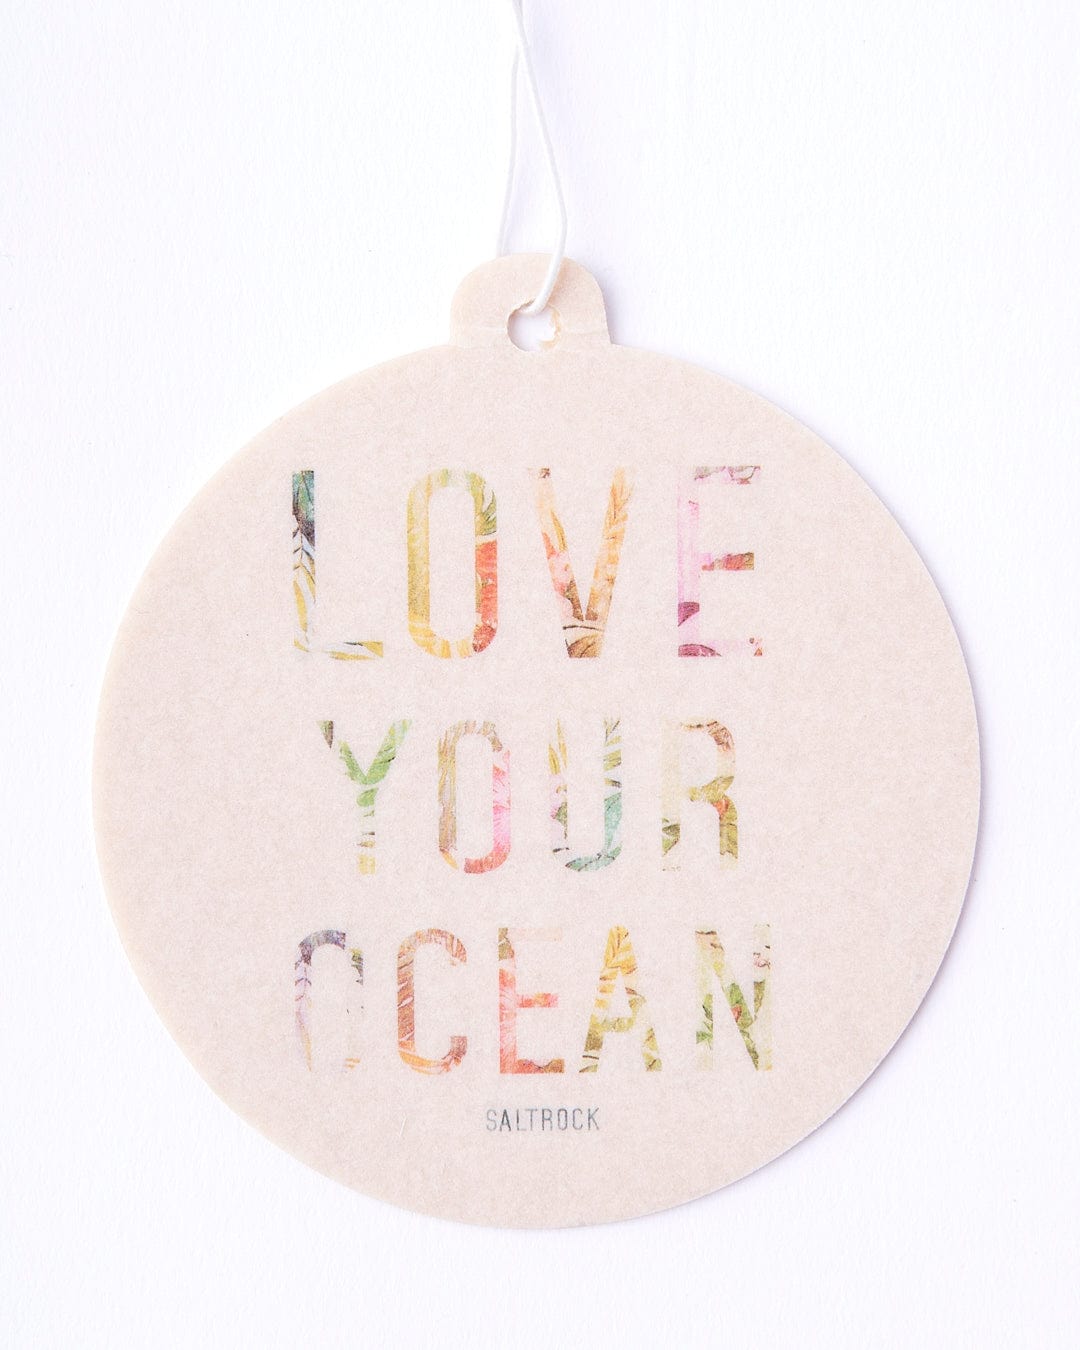 A round Ocean Love Air Freshener - Natural with the words love your ocean on it. (Brand Name: Saltrock)